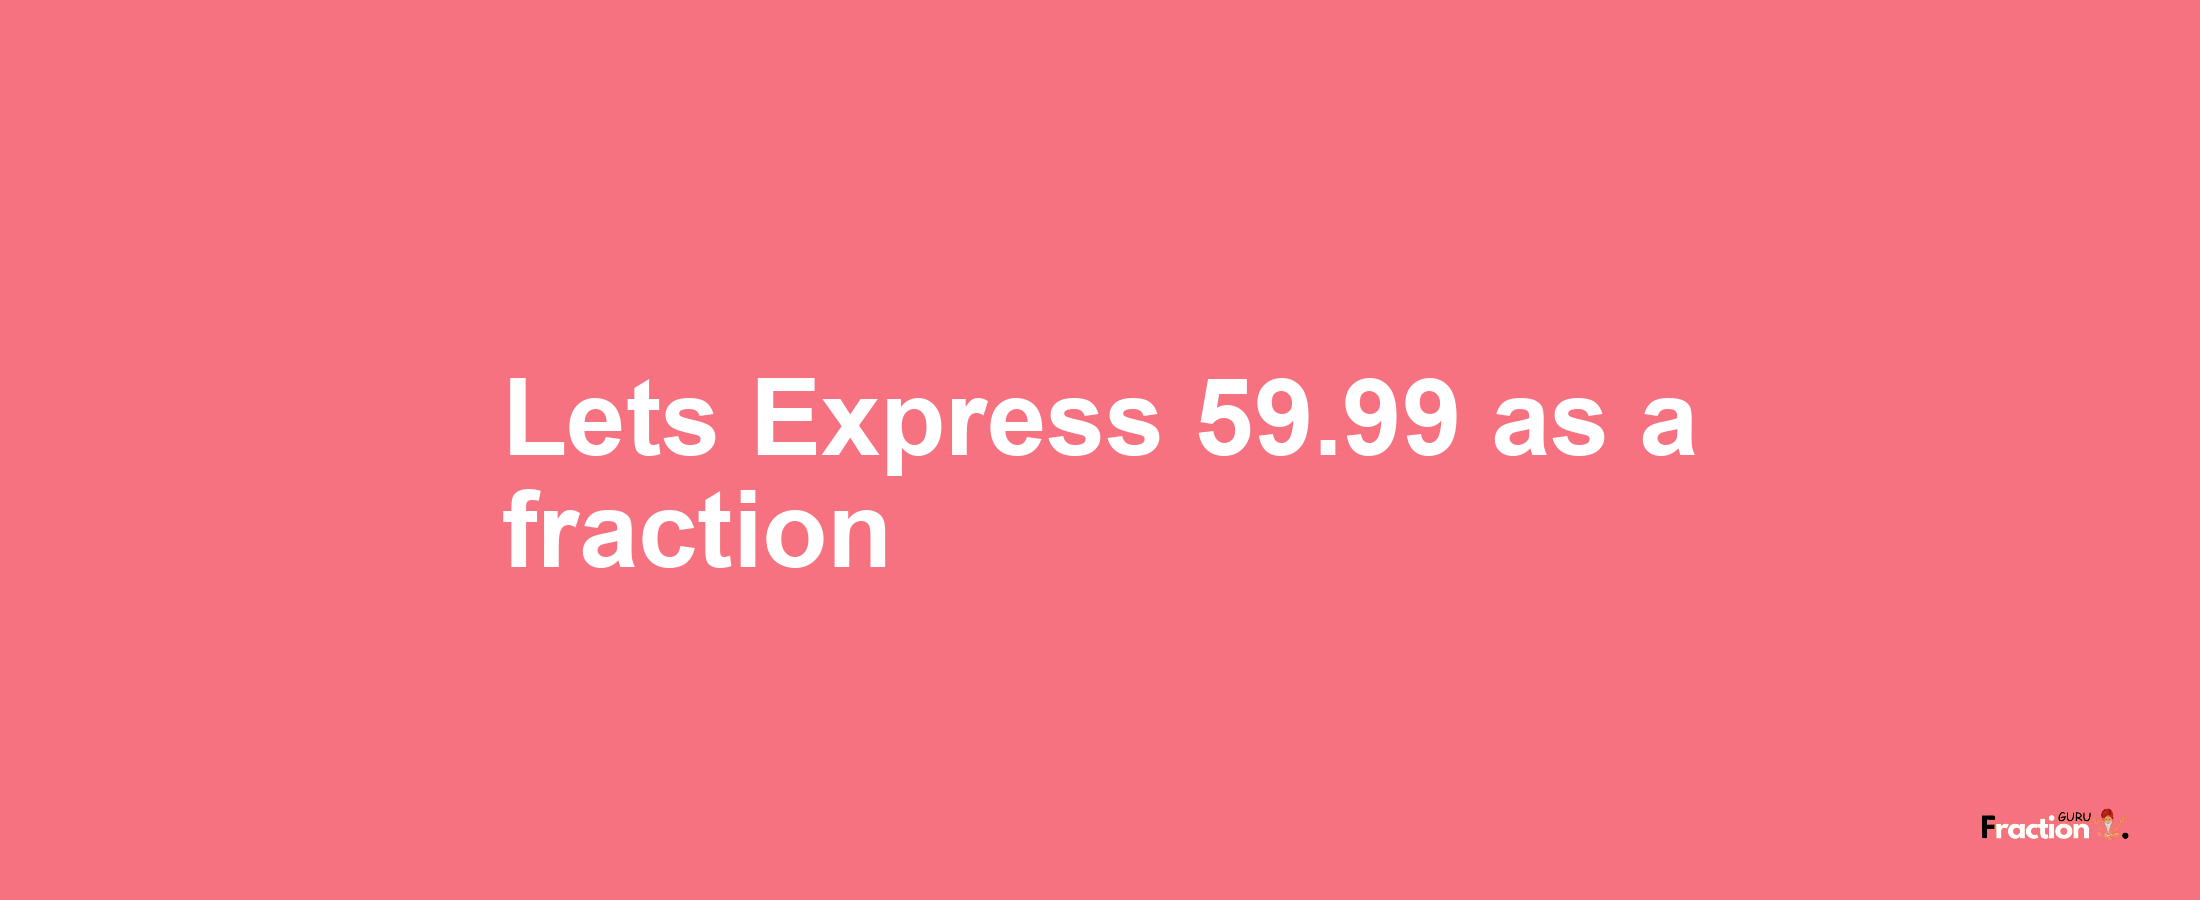 Lets Express 59.99 as afraction